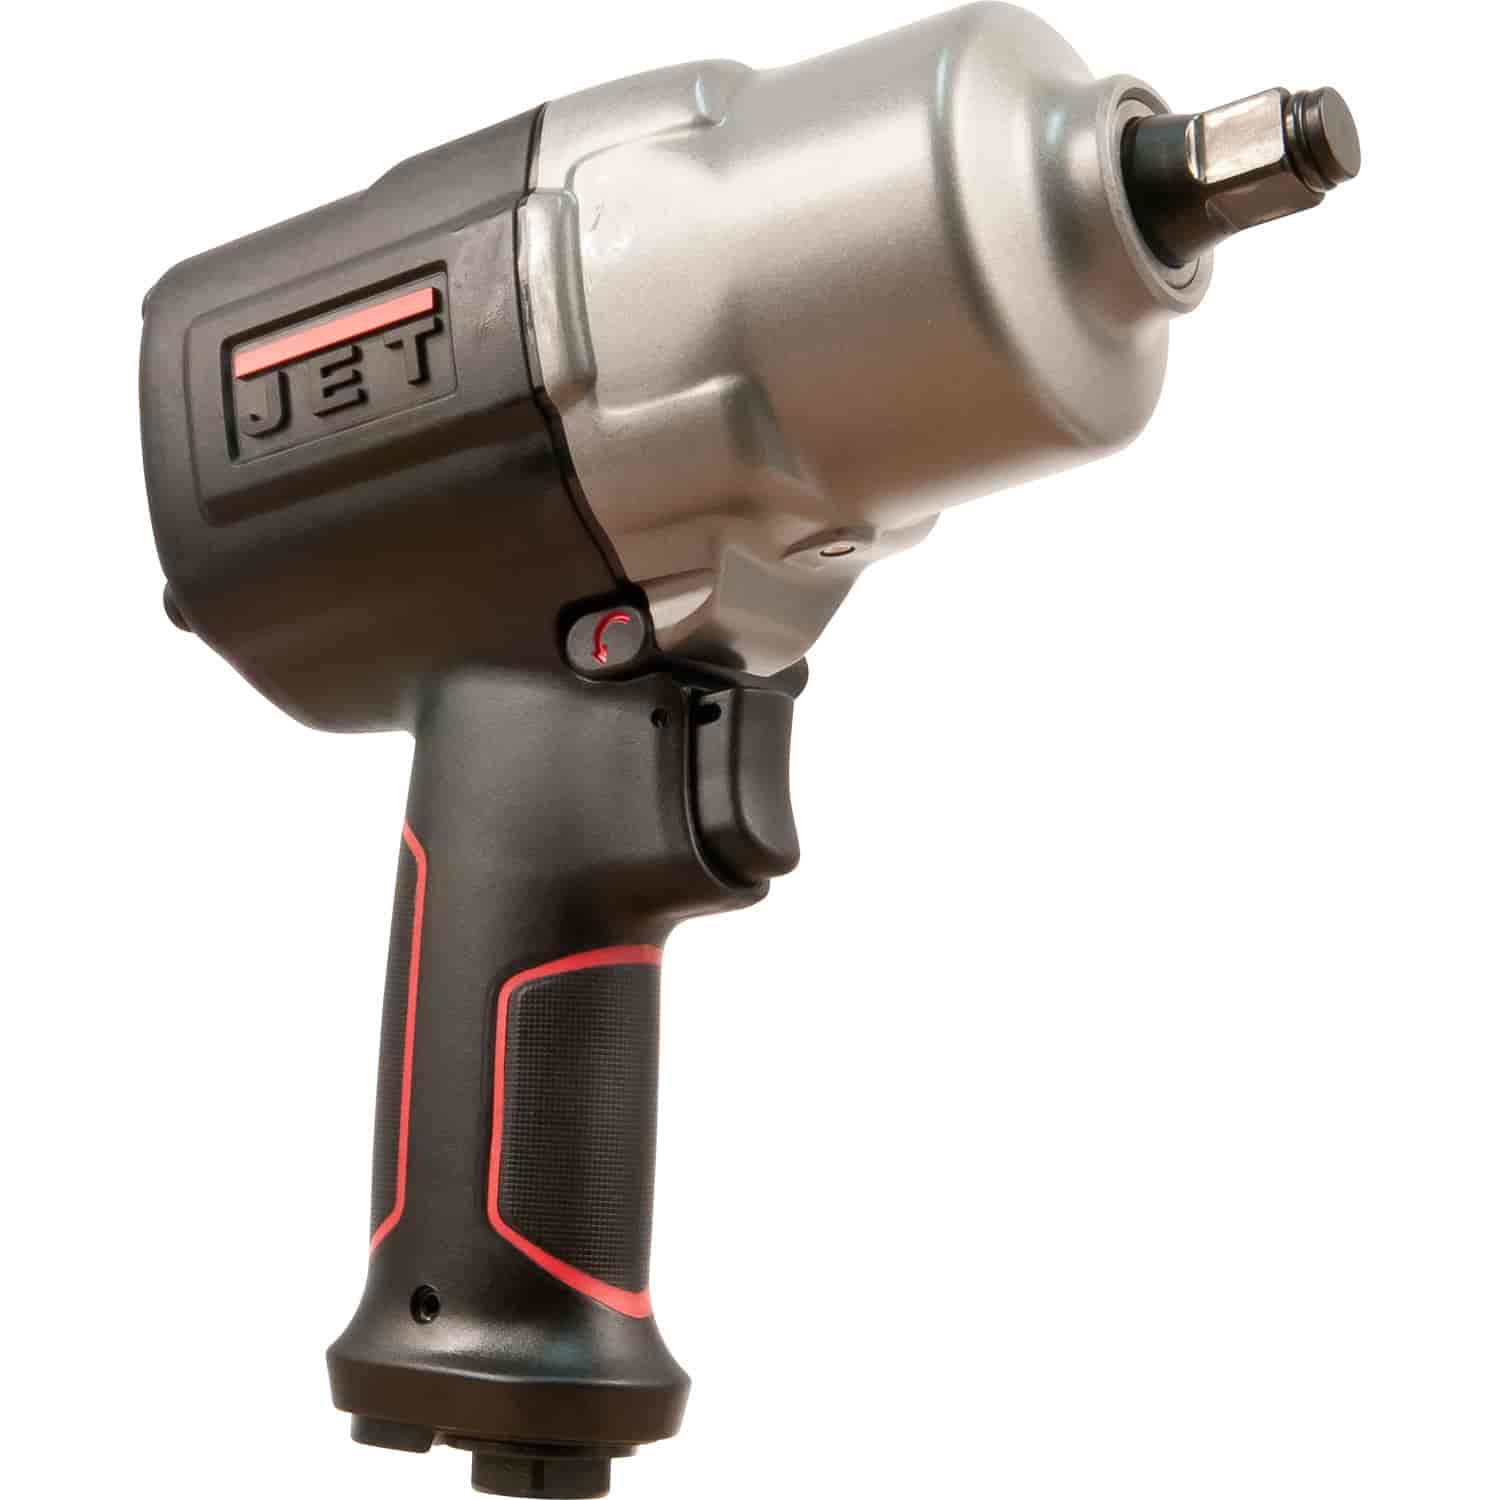 R12 1/2" Air Impact Wrench Square Drive: 1/2"